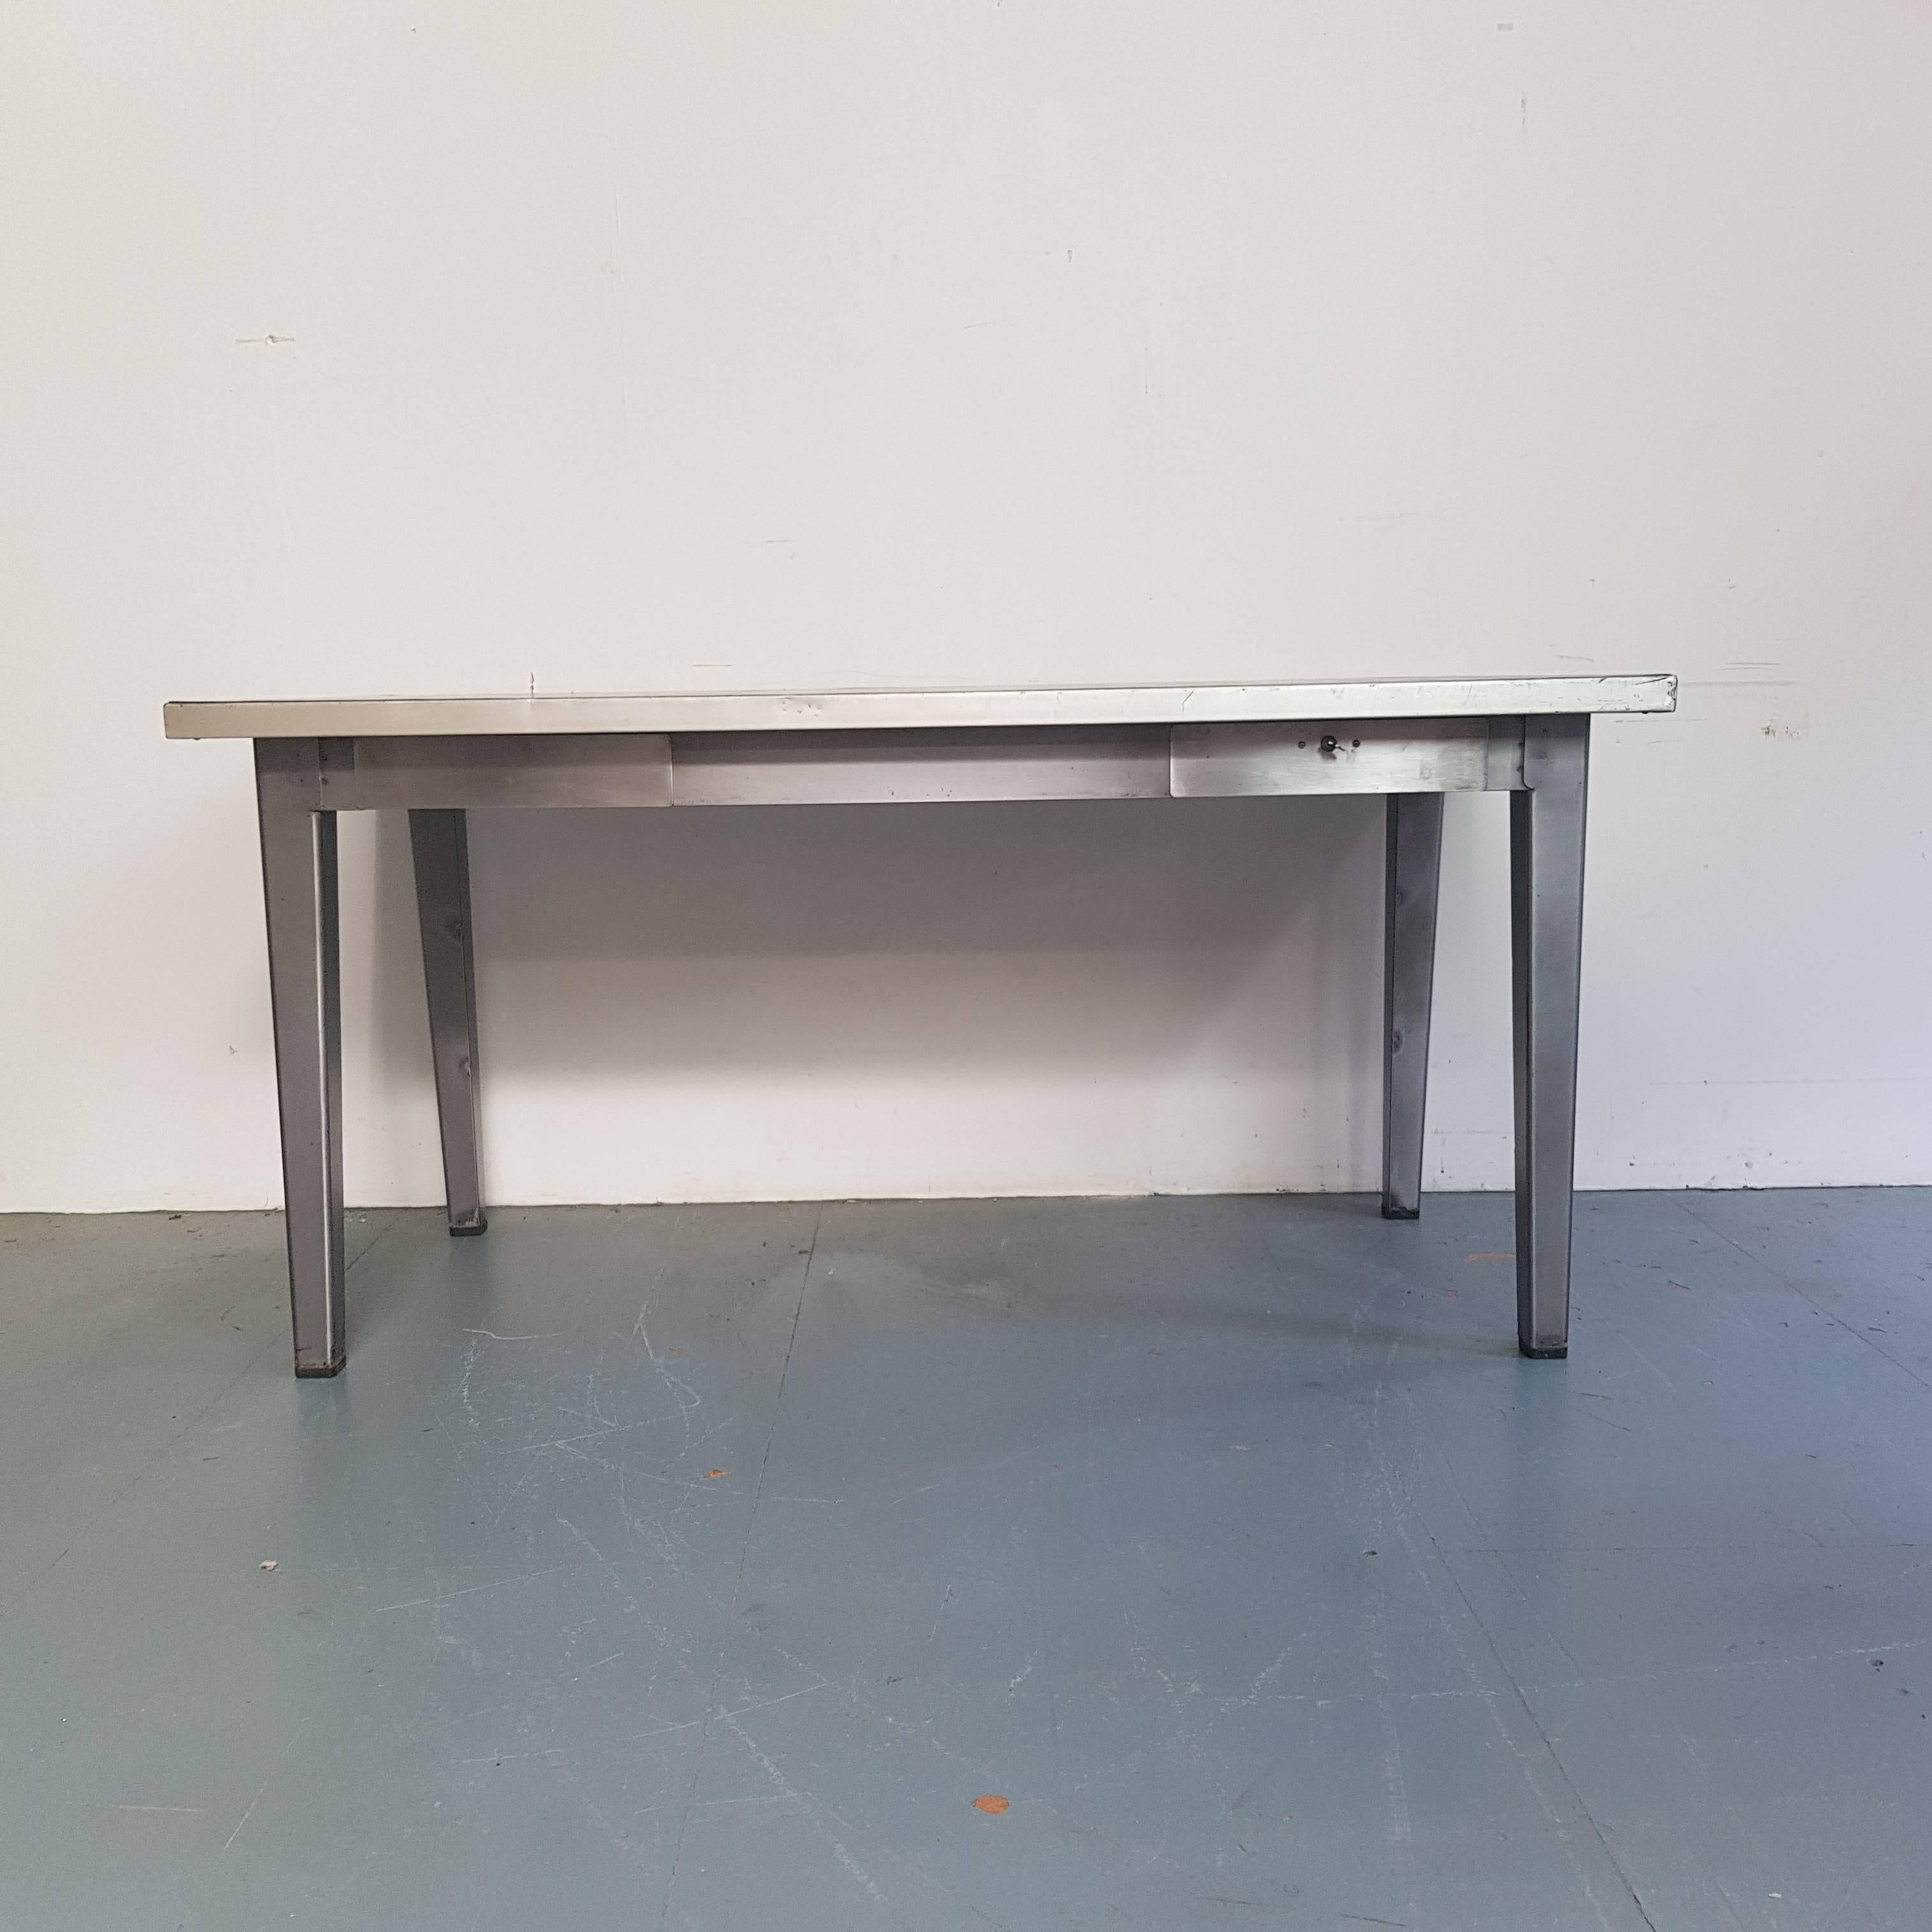 Lovely vintage industrial stripped and polished steel table with drawers with original rubber top.

Working lock and key on one drawer.

In good vintage condition - this piece comes from a working Industrial environment and so has signs of wear